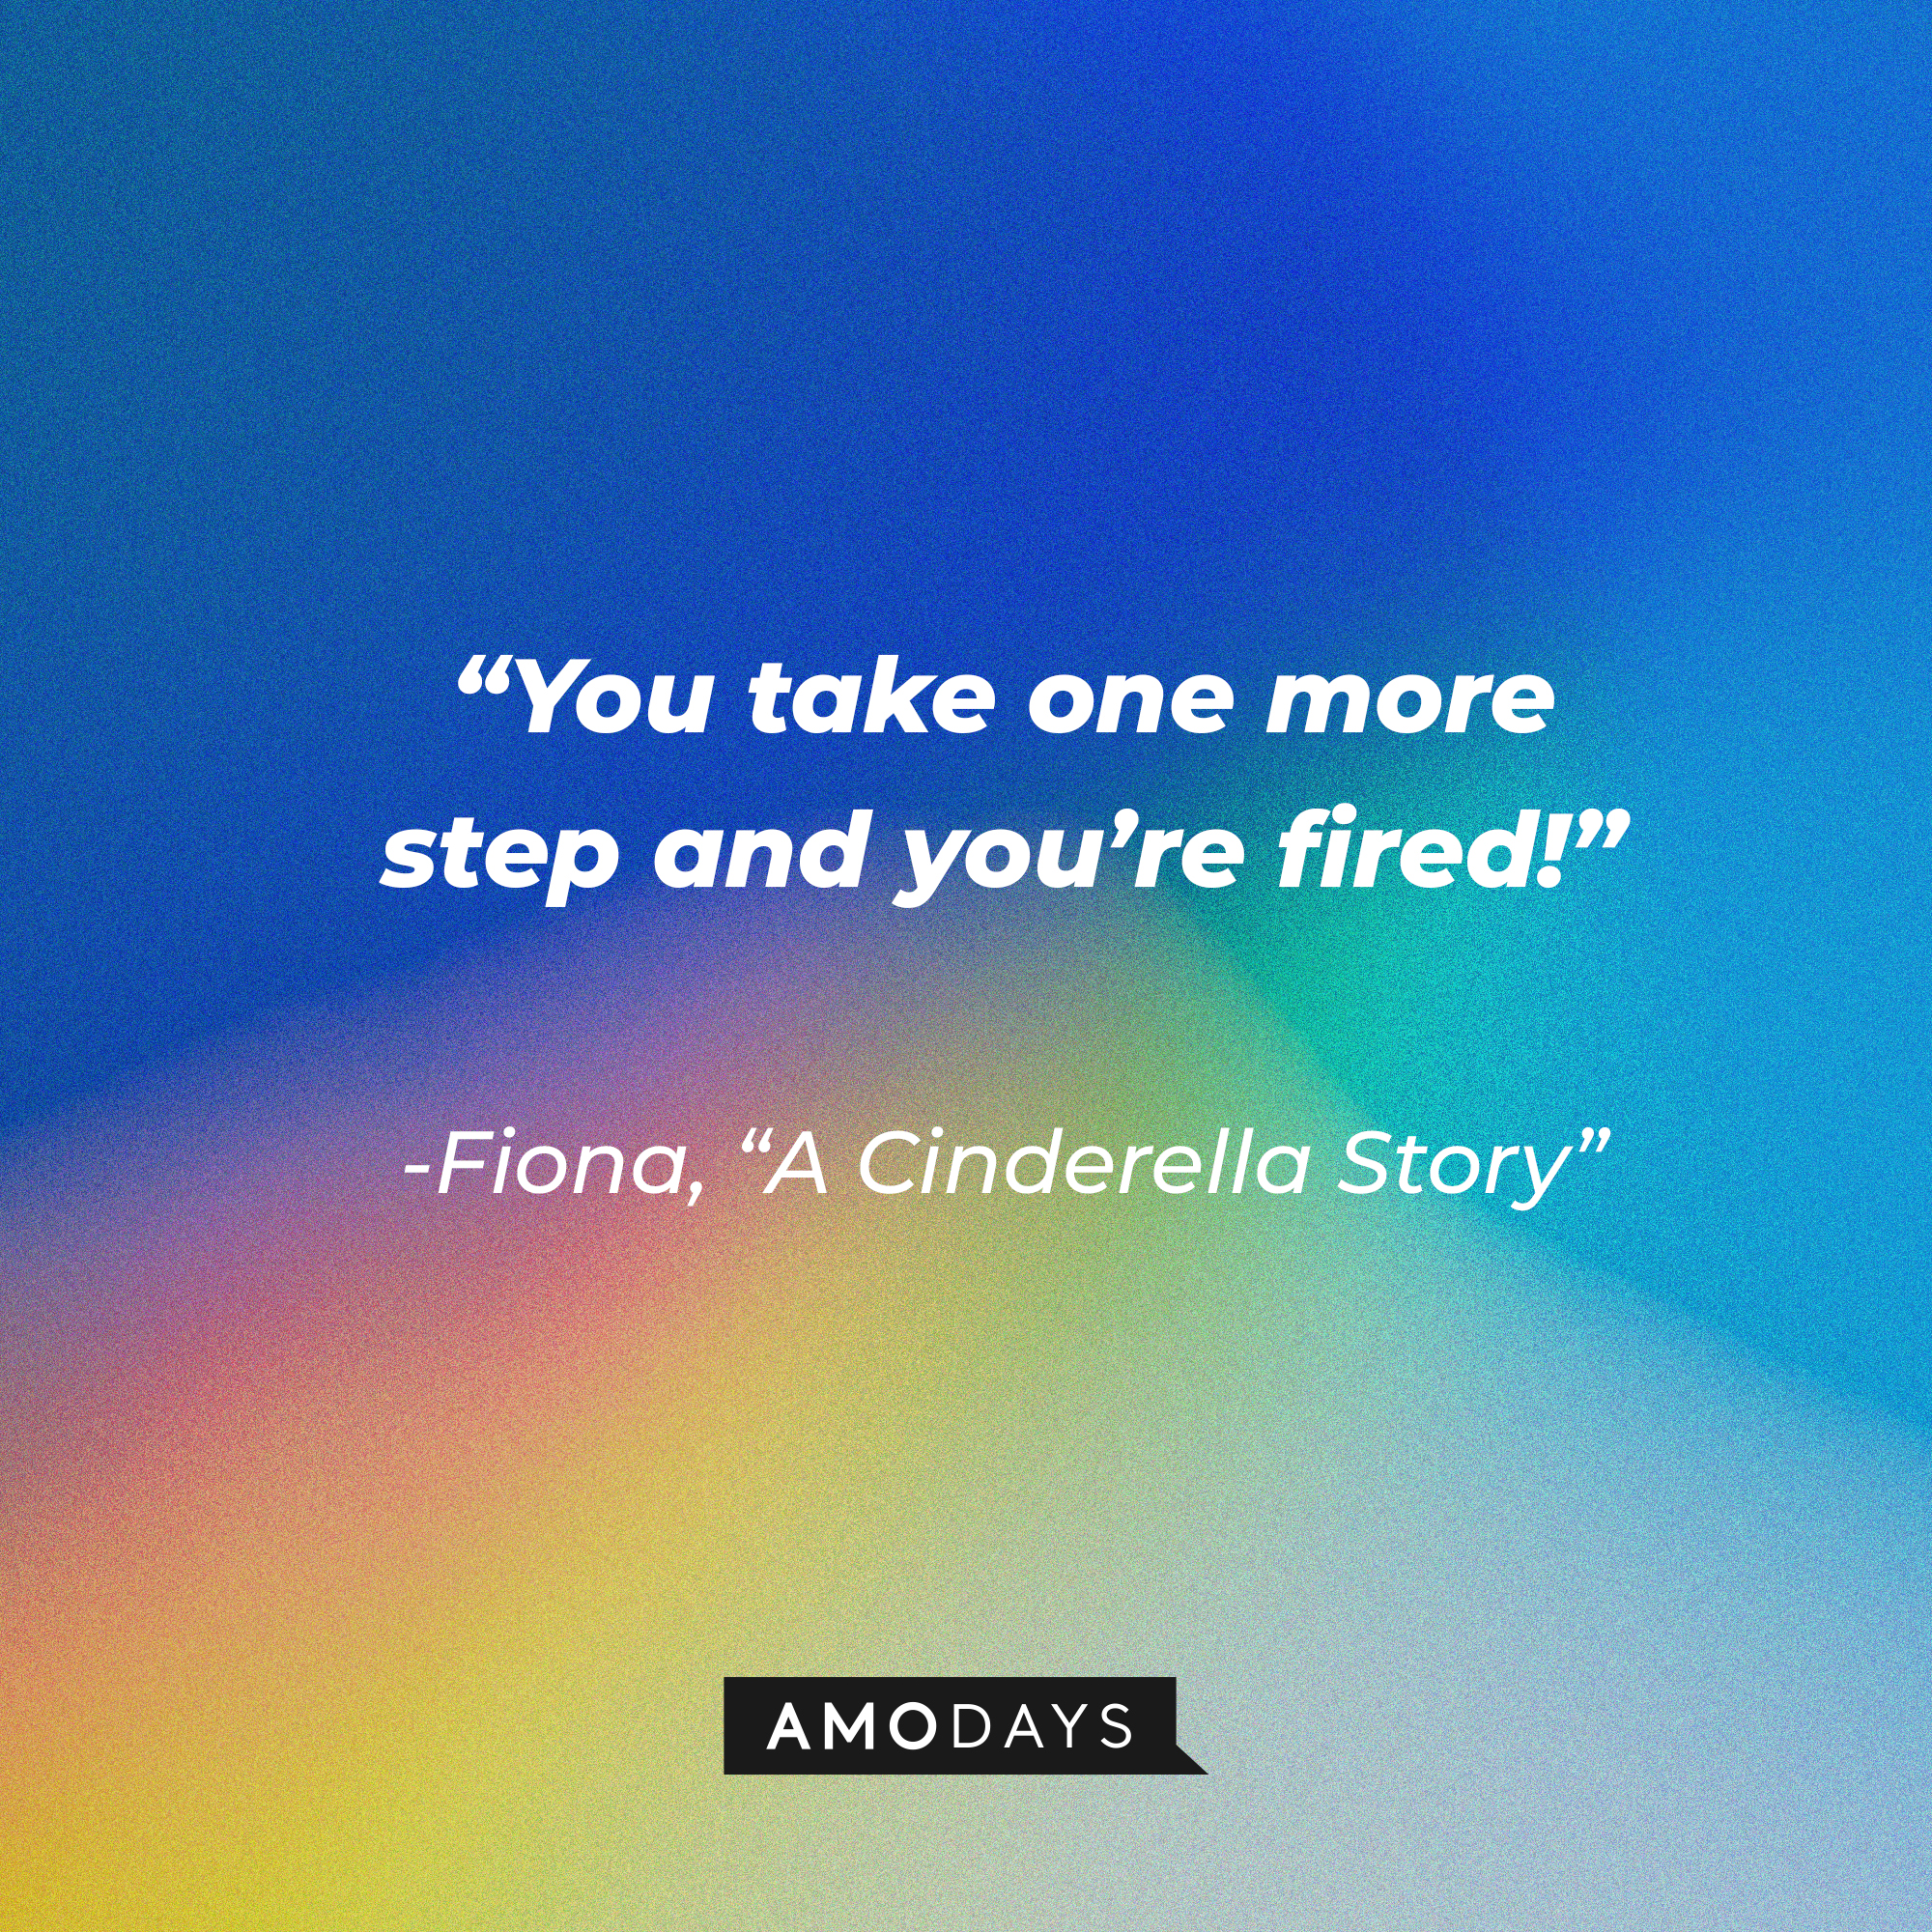 Fiona's quote from "A Cinderella Story:" “You take one more step and you’re fired!” | Source: Youtube.com/warnerbrosentertainment